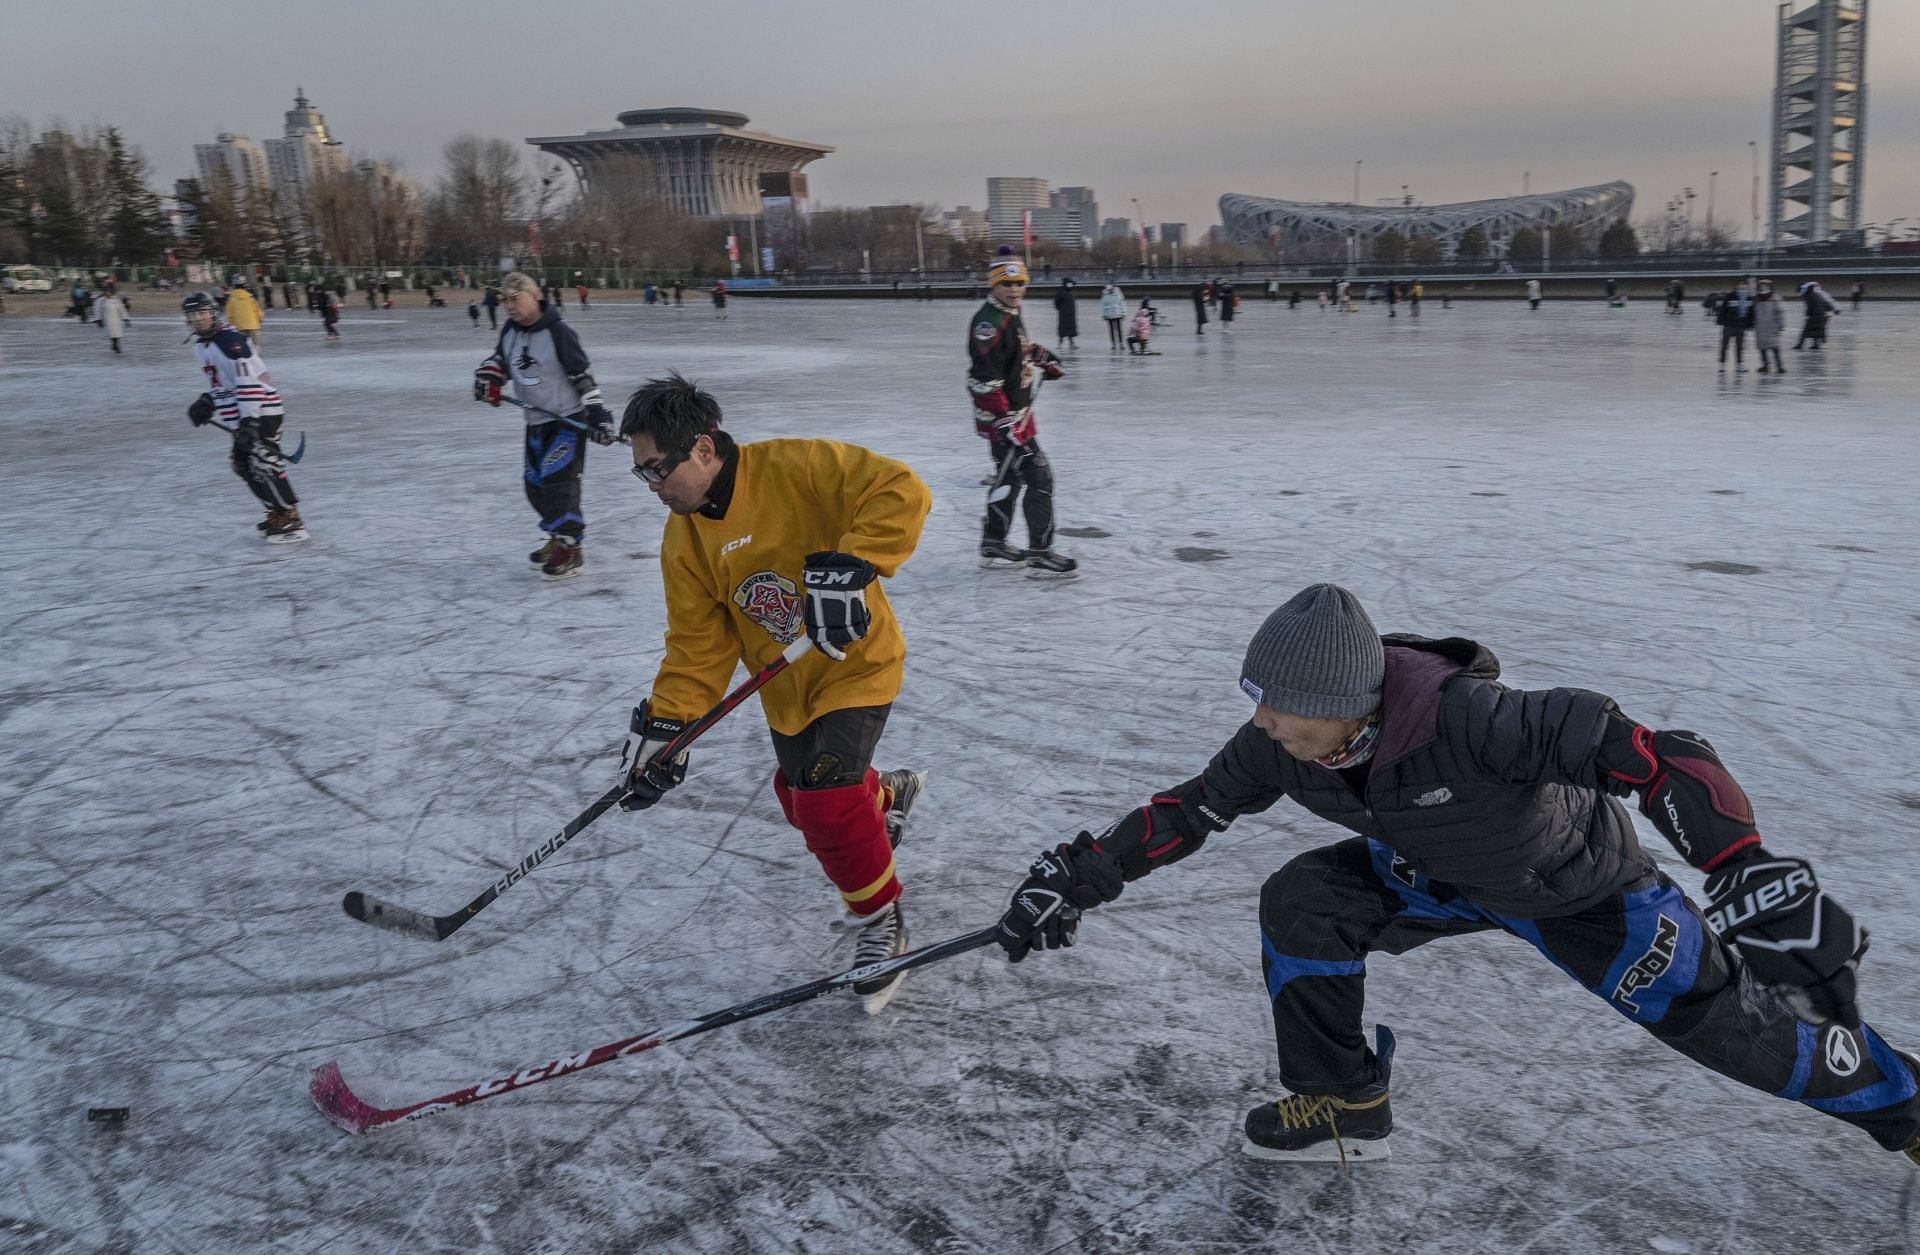 Beijing Winter Sport Culture As China Prepares For Winter Olympics